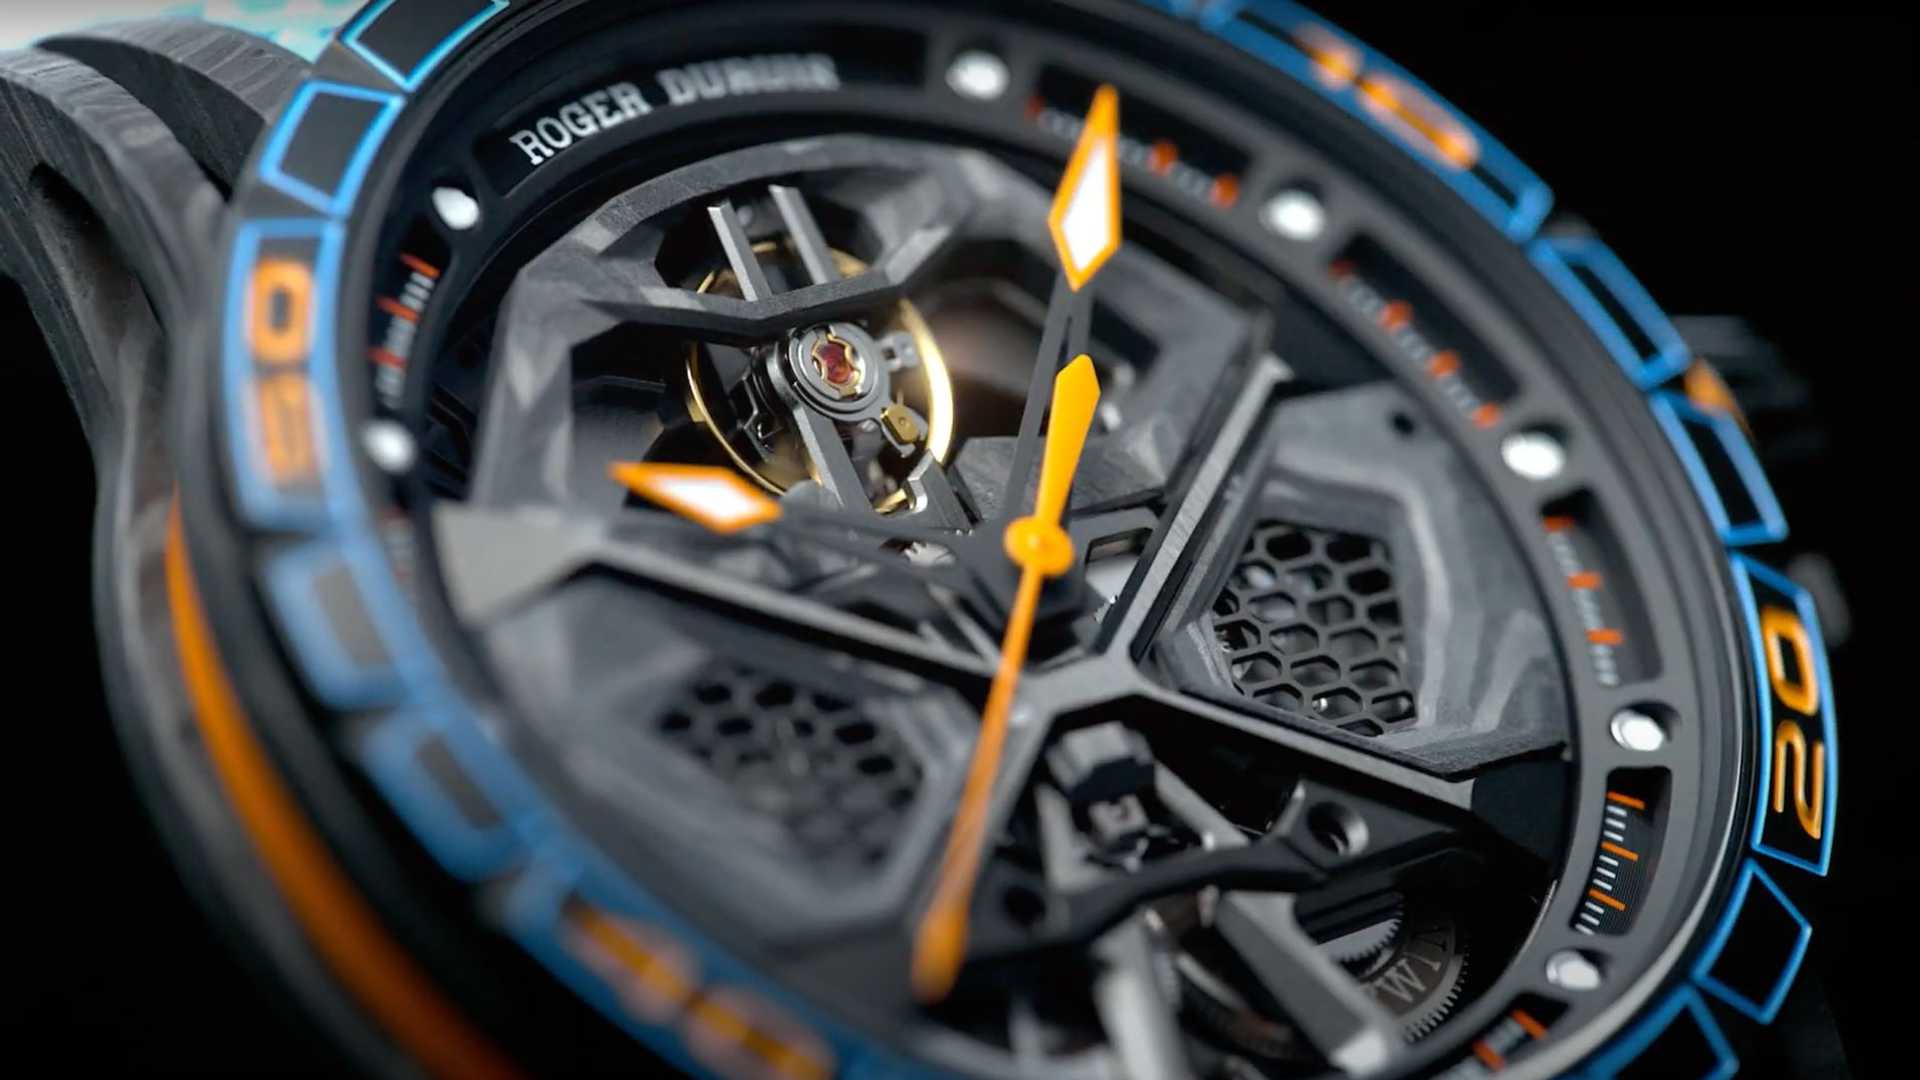 roger-dubuis-excalibur-spider-huracan-sto